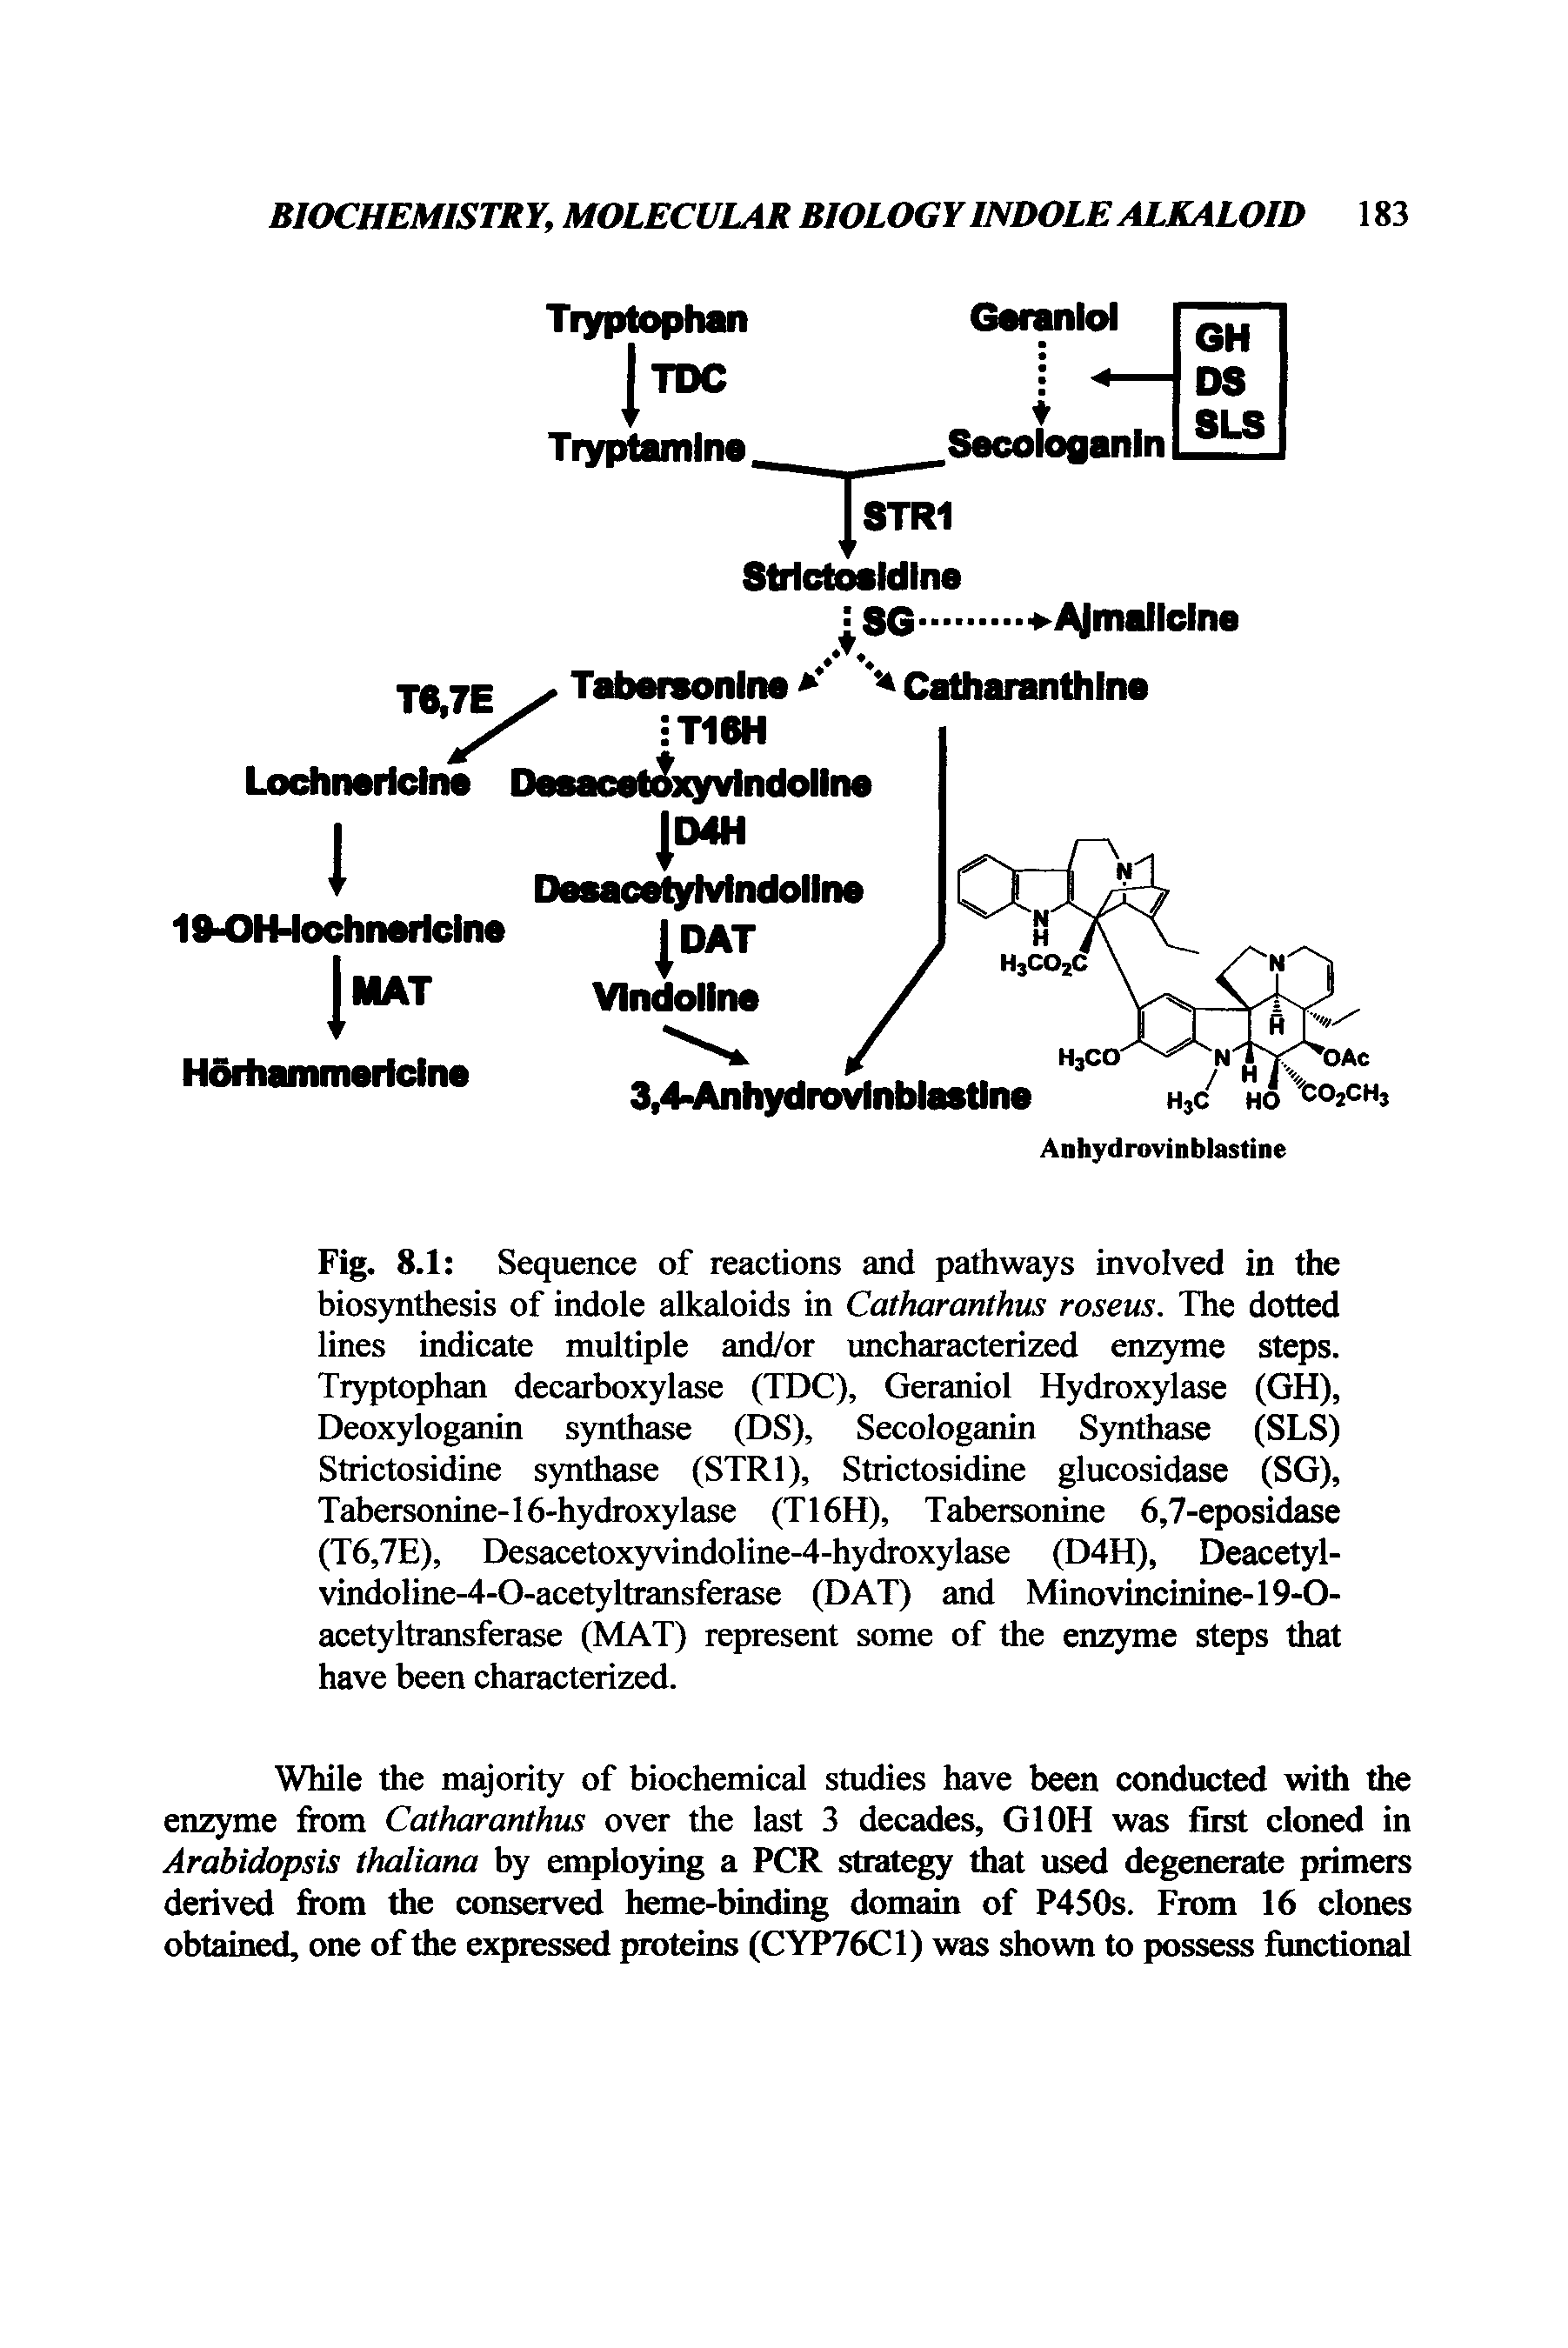 Fig. 8.1 Sequence of reactions and pathways involved in the biosynthesis of indole alkaloids in Catharanthus roseus. The dotted lines indicate multiple and/or uncharacterized enzyme steps. Tryptophan decarboxylase (TDC), Geraniol Hydroxylase (GH), Deoxyloganin synthase (DS), Secologanin Synthase (SLS) Strictosidine synthase (STR1), Strictosidine glucosidase (SG), Tabersonine-16-hydroxylase (T16H), Tabersonine 6,7-eposidase (T6,7E), Desacetoxyvindoline-4-hydroxylase (D4H), Deacetyl-vindoline-4-O-acetyltransferase (DAT) and Minovincinine-19-O-acetyltransferase (MAT) represent some of the enzyme steps that have been characterized.